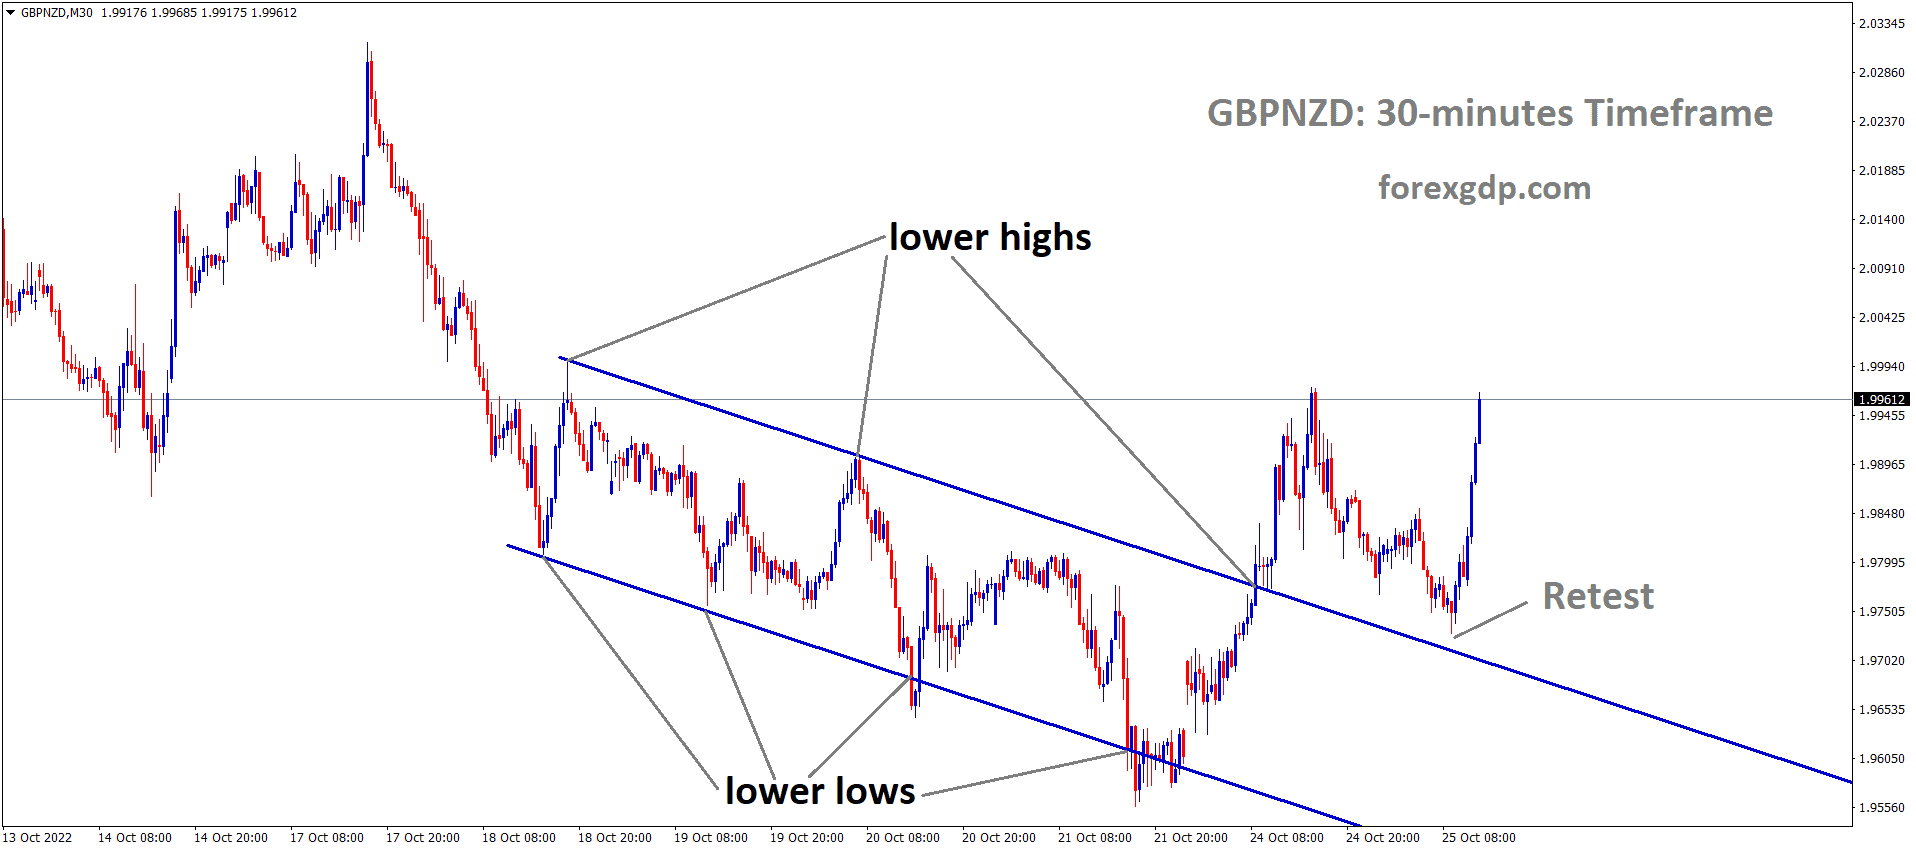 GBPNZD has broken the Descending channel and retested and rebounded from the broken area of the channel